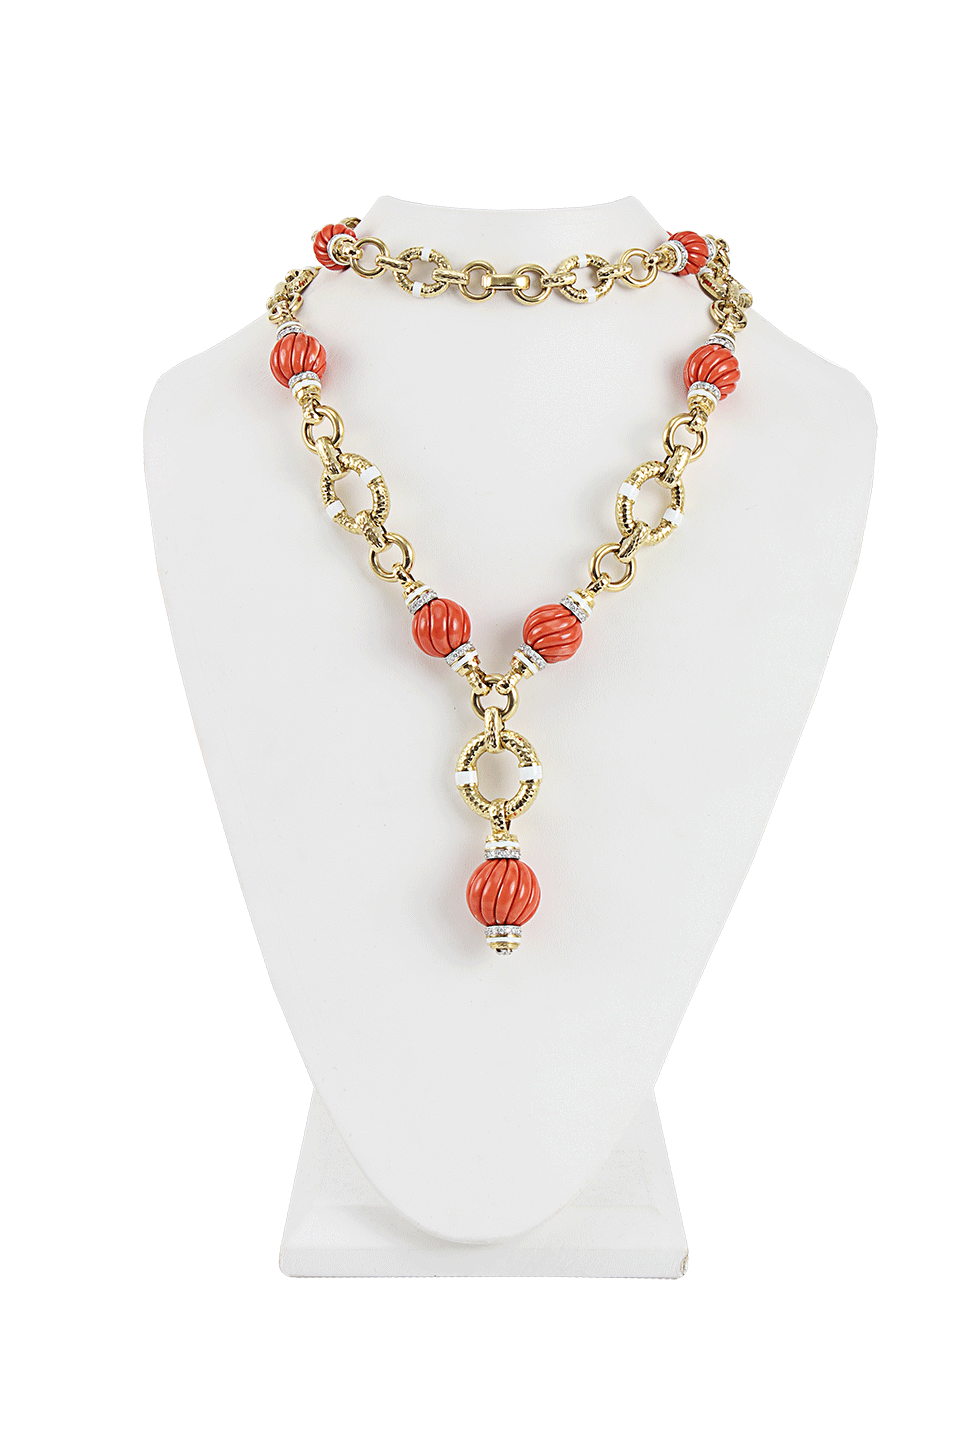 DAVID WEBB-Coral Bead and Diamond Necklace-YLW GOLD